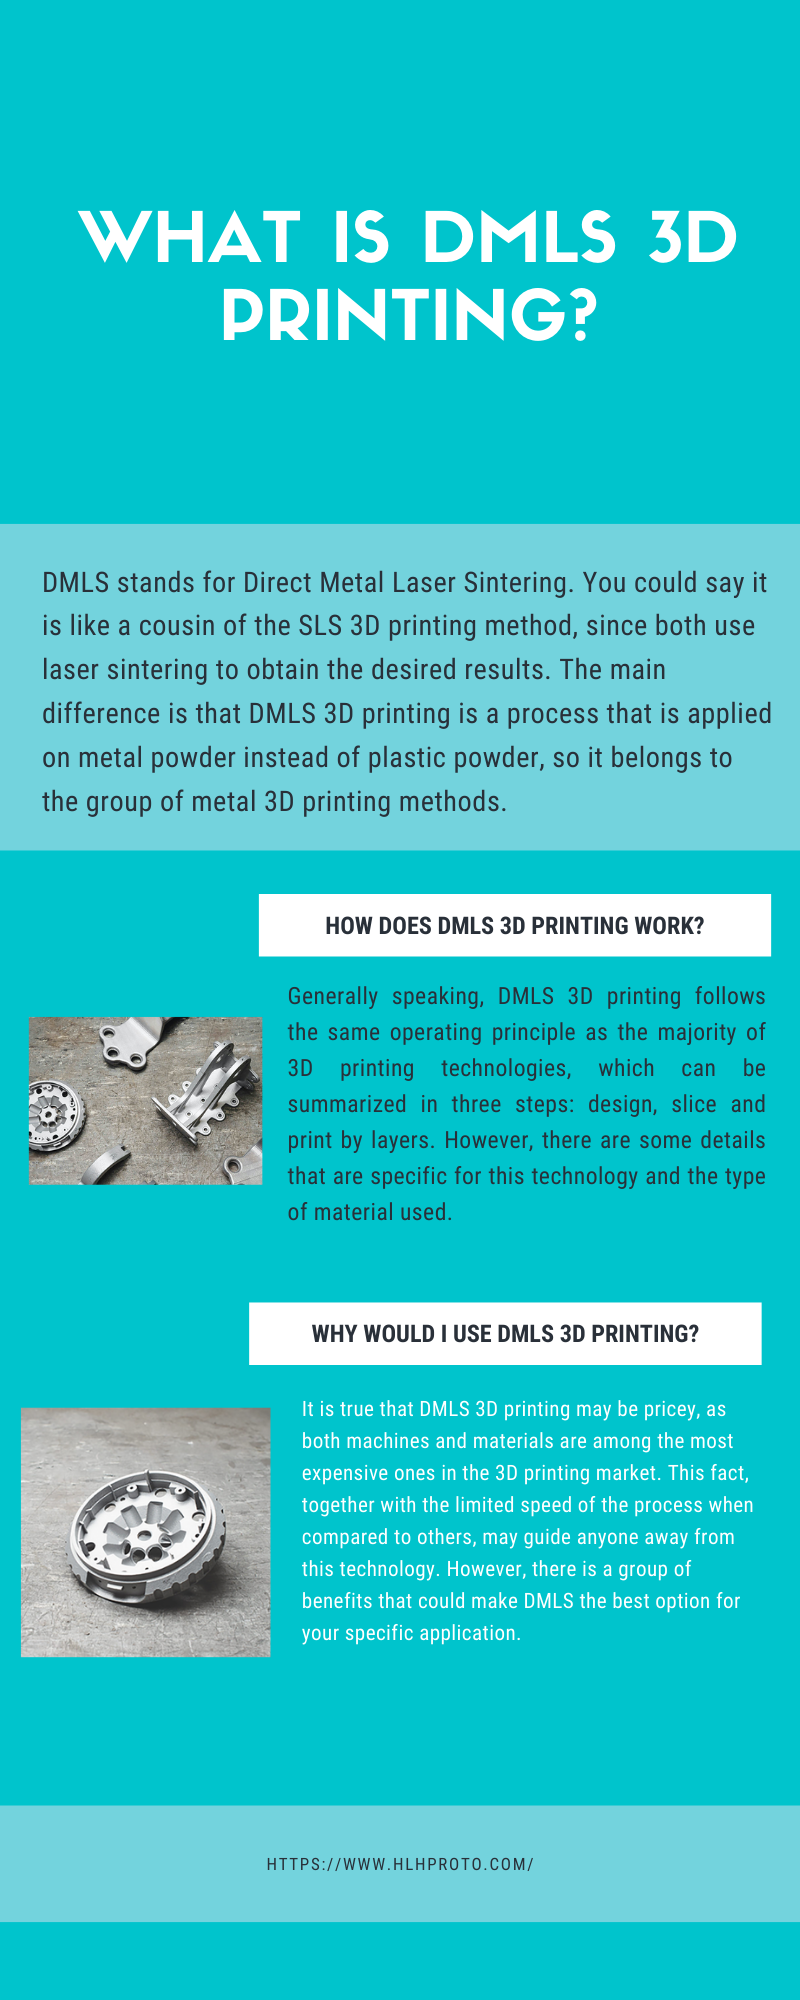 What is DMLS 3D printing DMLS stands for Direct Metal Laser Sintering. You could say it is like a cousin of the SLS 3D printing method, since both use laser sintering to obtain the desired results. The main difference is that DMLS 3D printing is a process that is applied on metal by HLH PROTO LTD